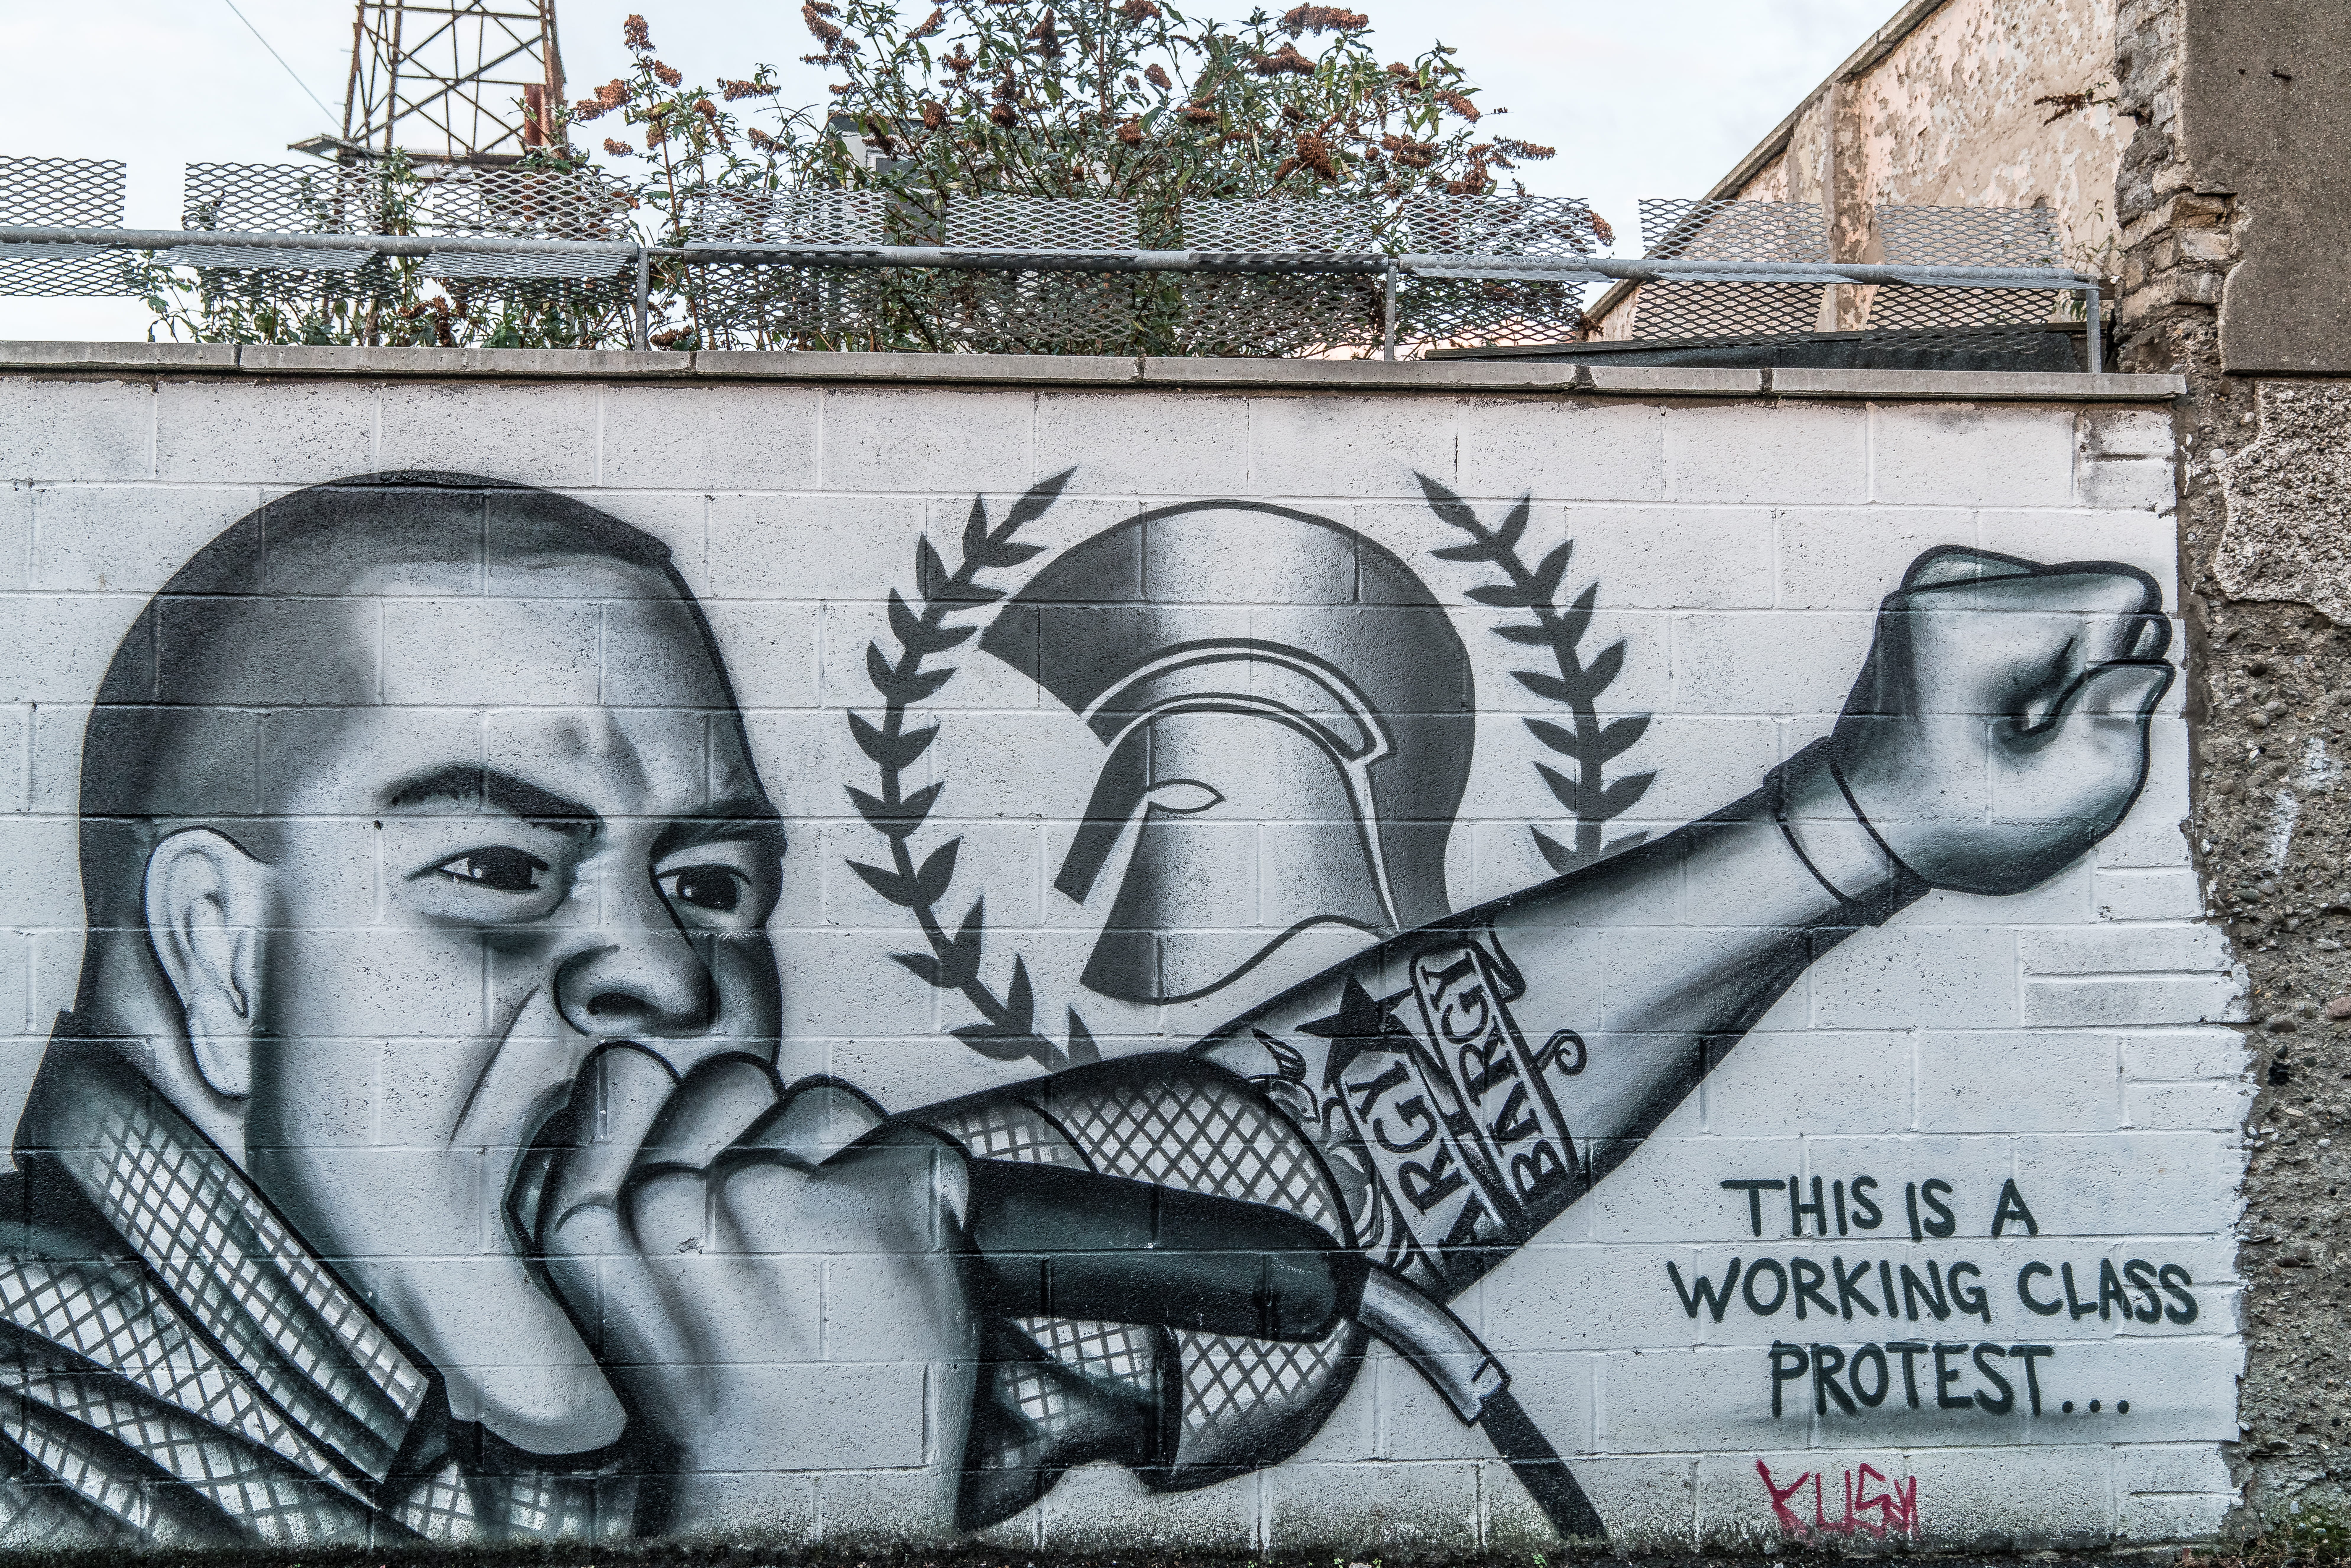 White wall with black and white graffiti of a man holding a microphone with fist in the air. Text at the bottom of the graffiti says, "This is a working class protest..."